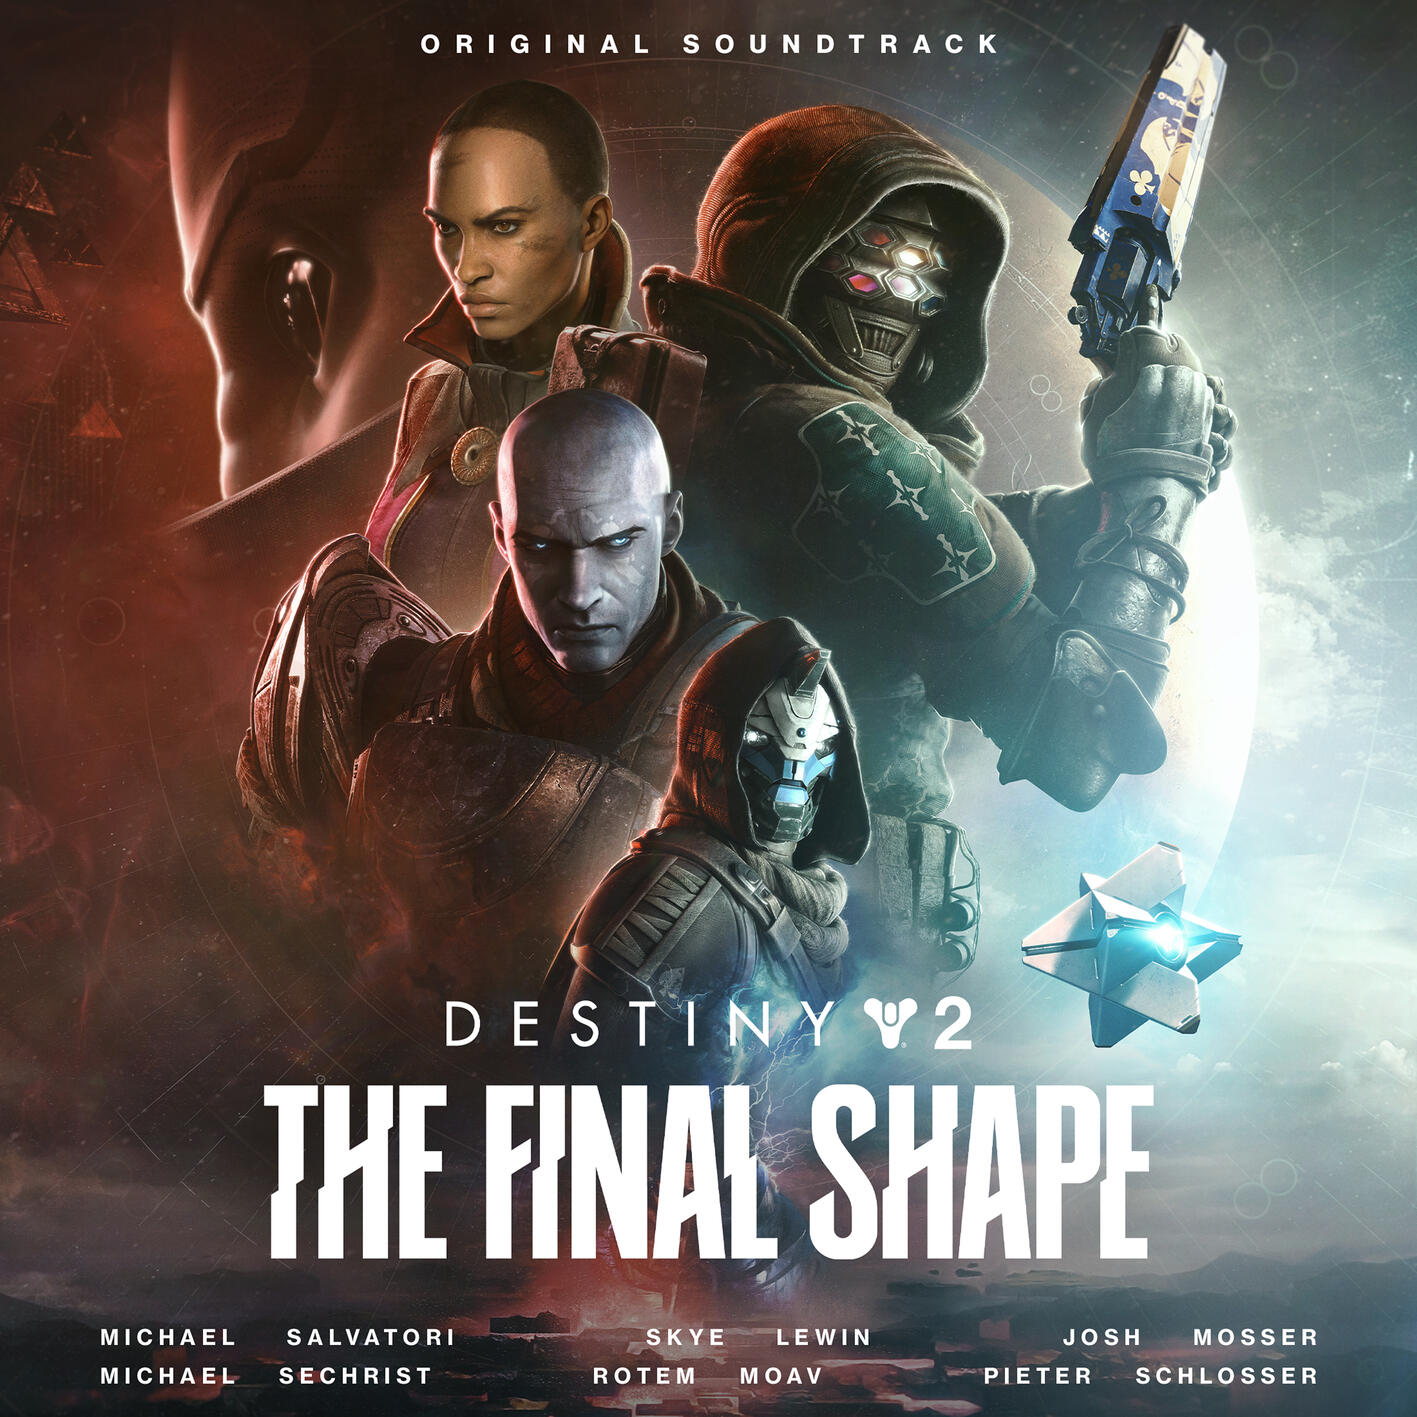 Destiny 2 Releases The Final Shape Soundtrack Early, Listen Here